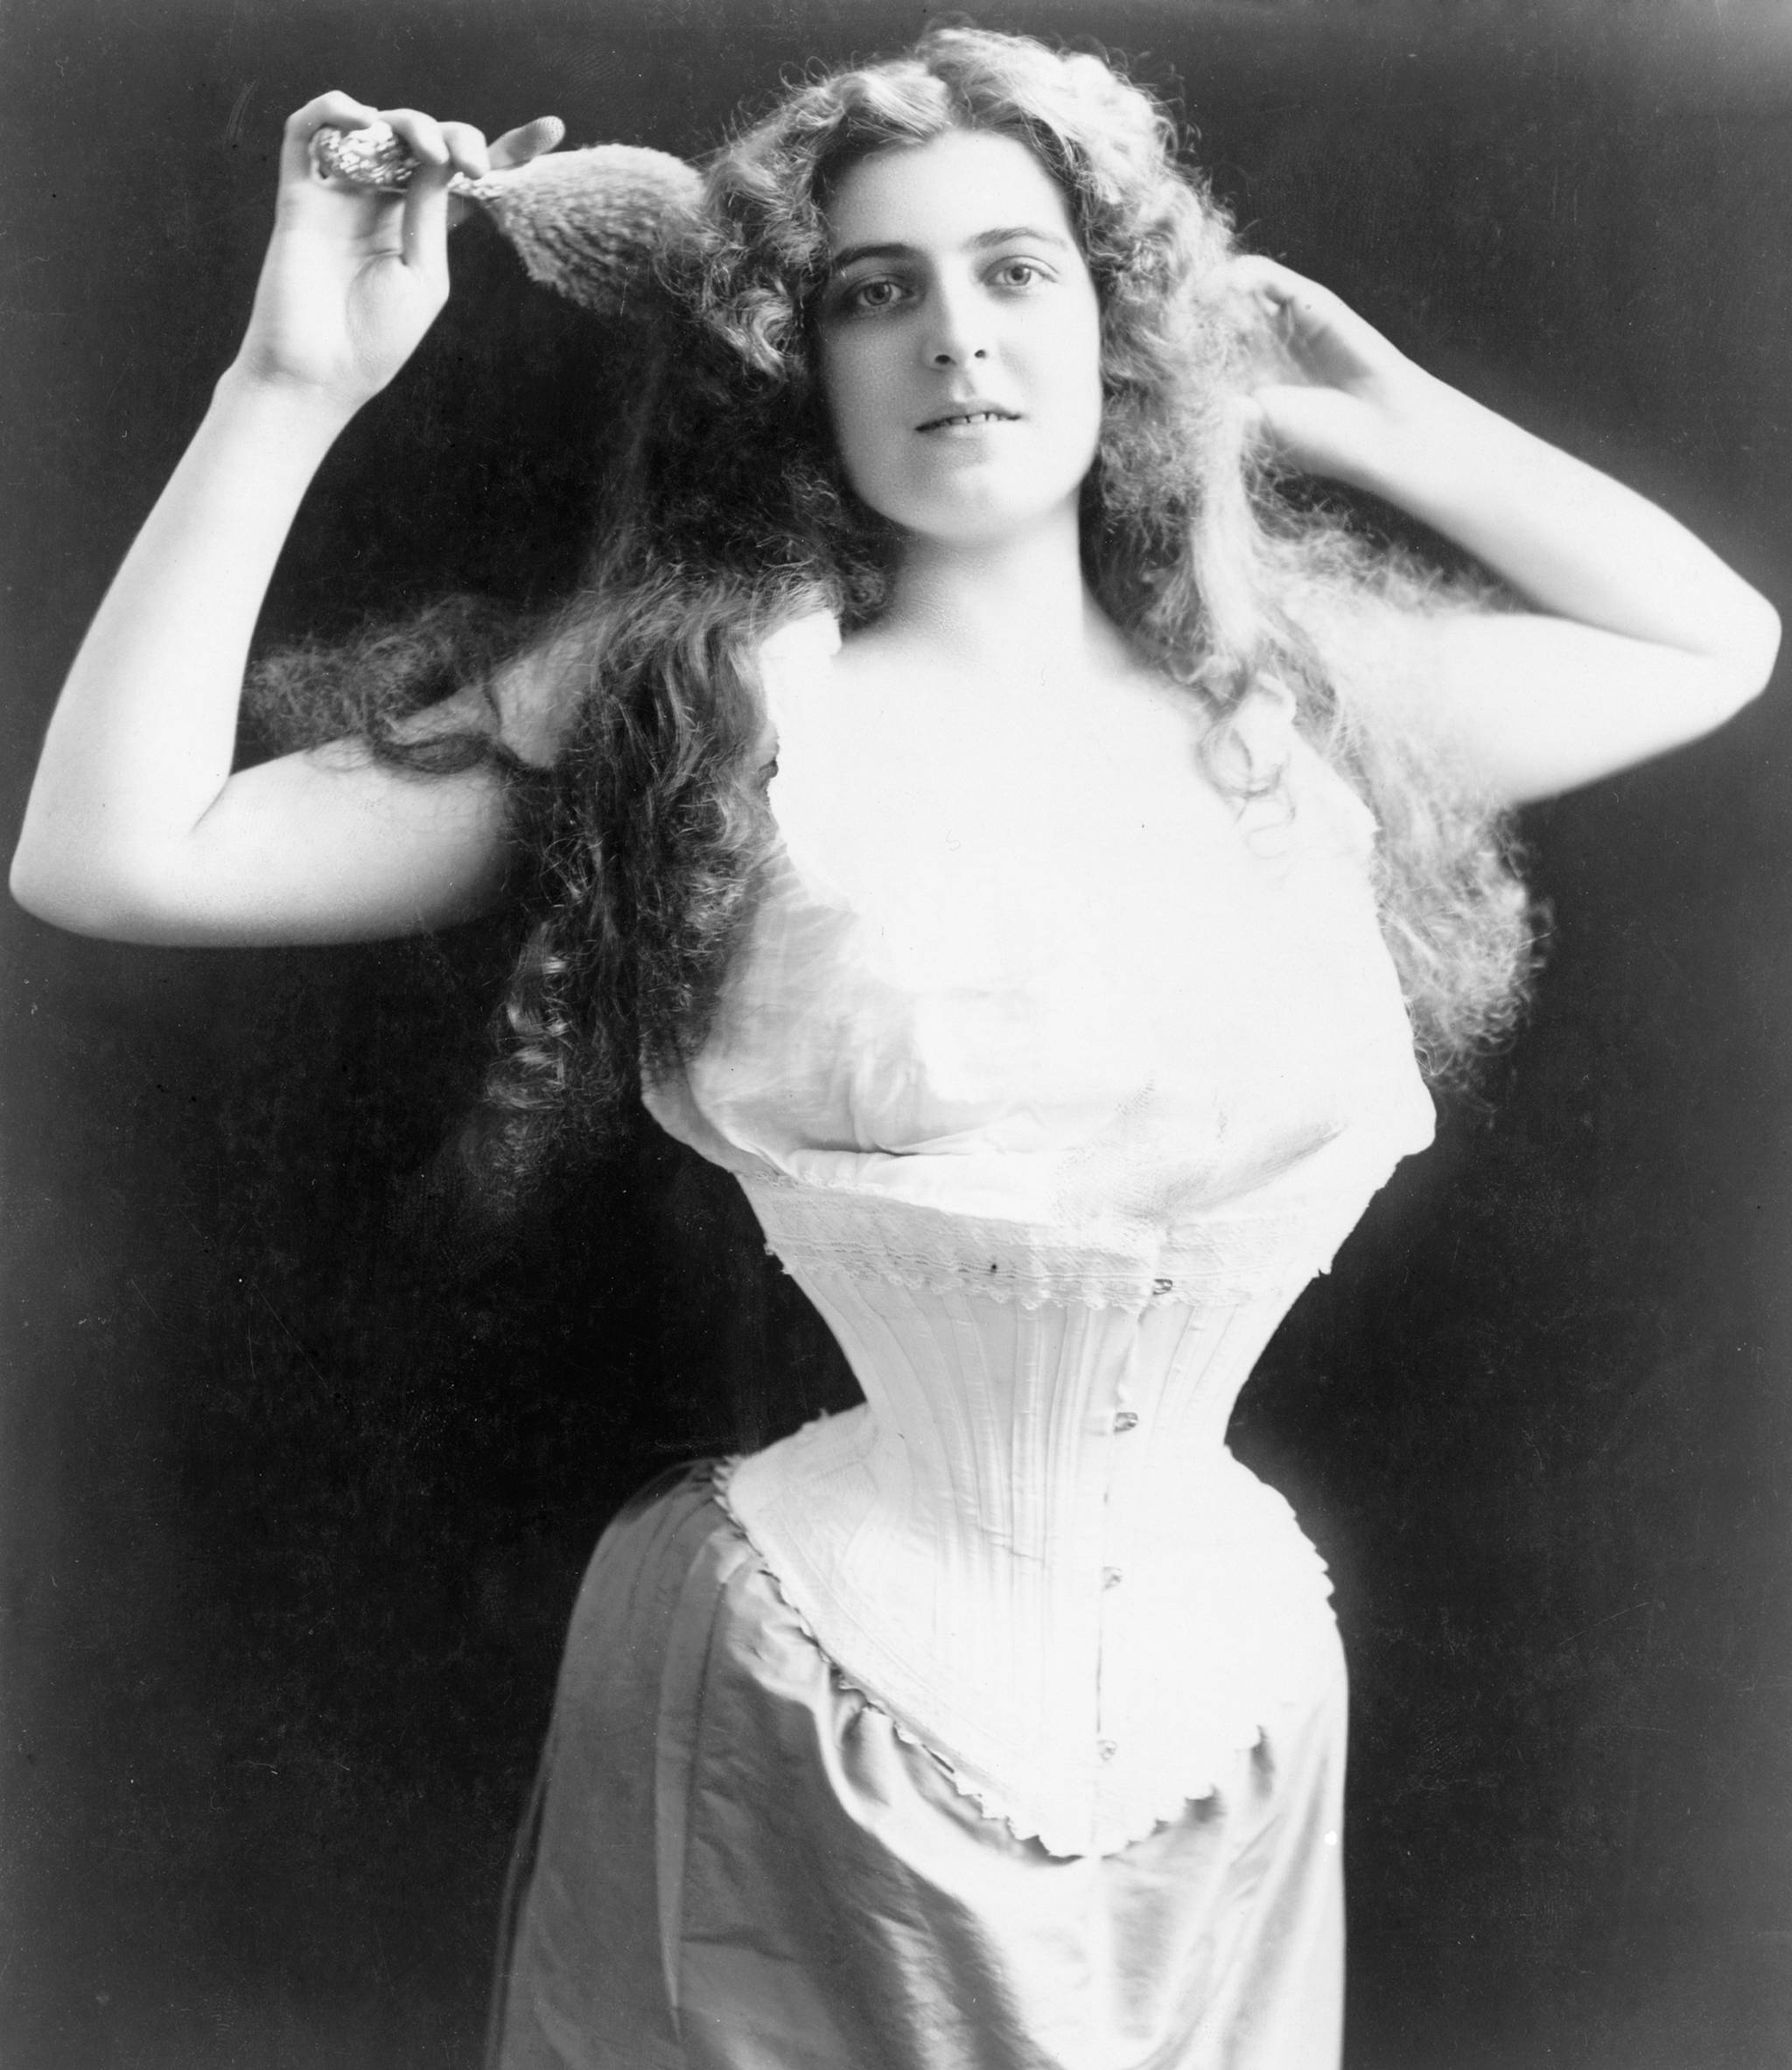 A late 1800s beauty models a corset of the time, designed to push up her breasts, cinch in the waist, and accentuate the backwards flare of her derriere. COURTESY PHOTO, WRVM